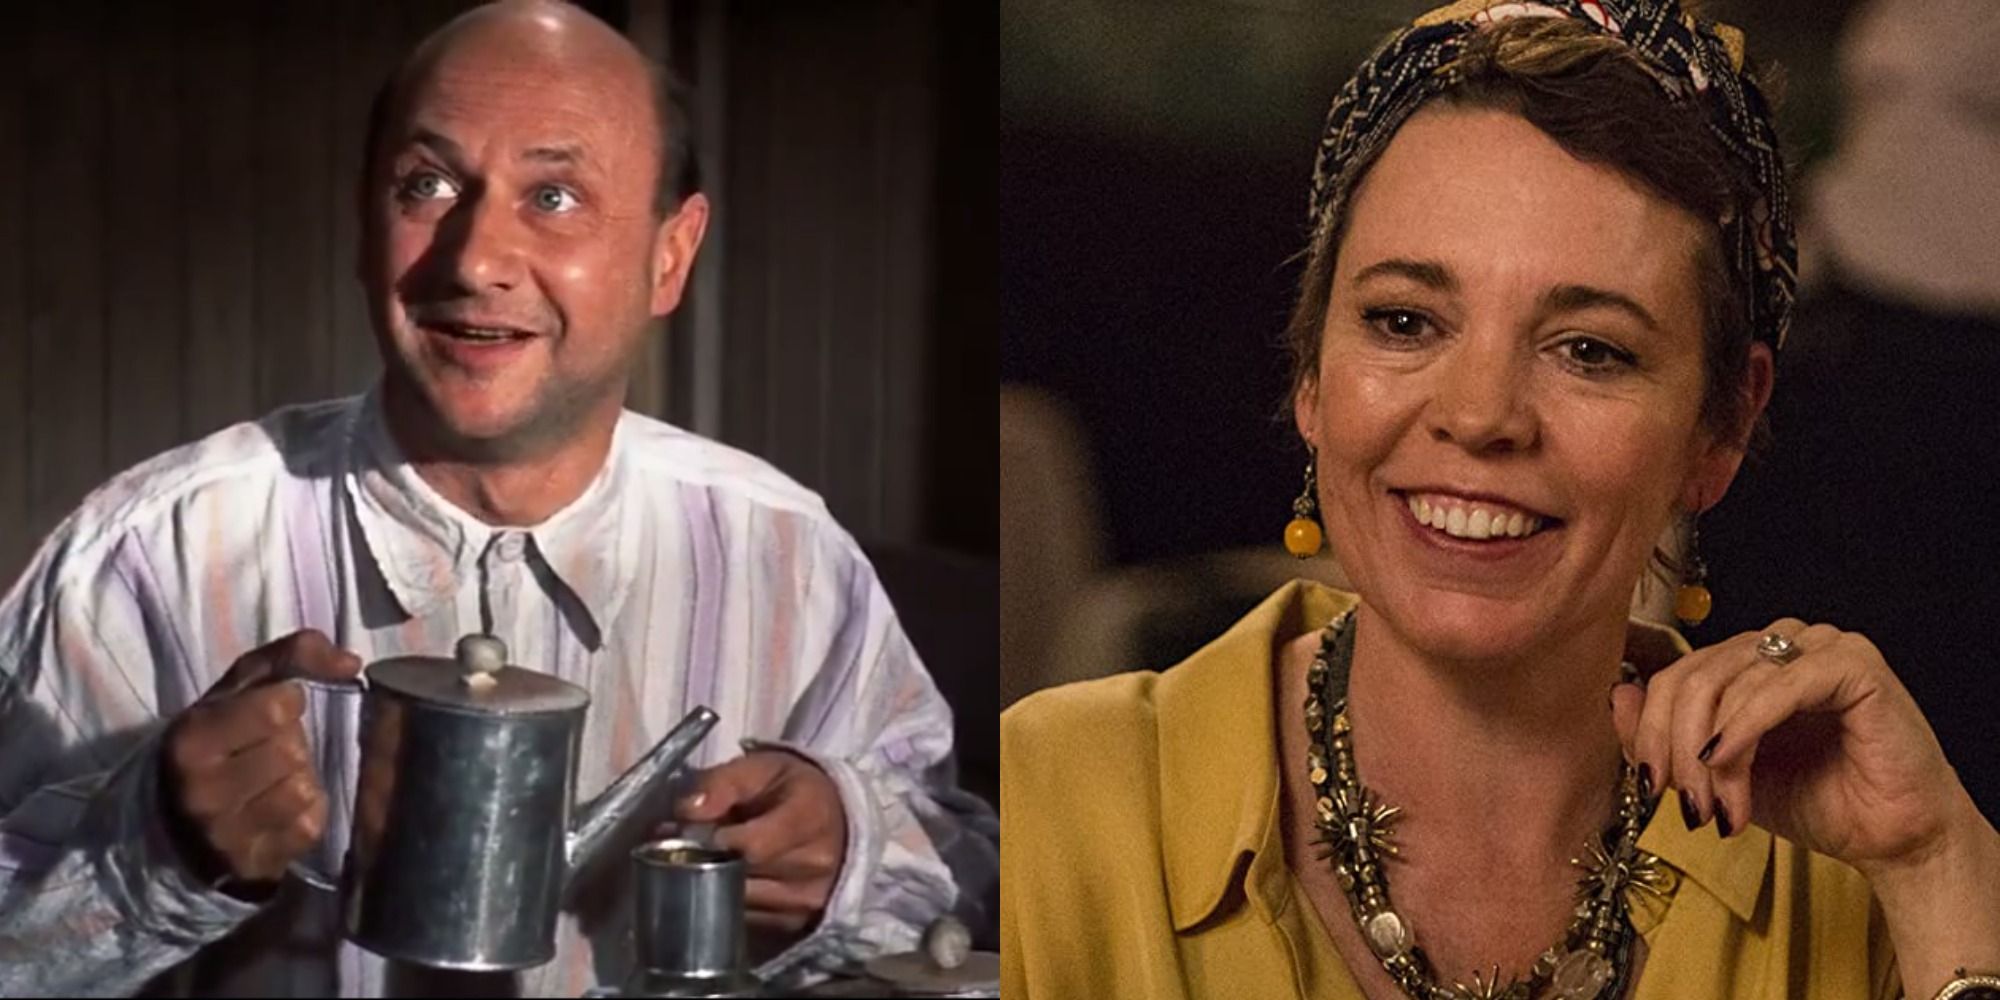 Split image of Donald Pleasence in The Great Escape and Olivia Colman in Fleabag